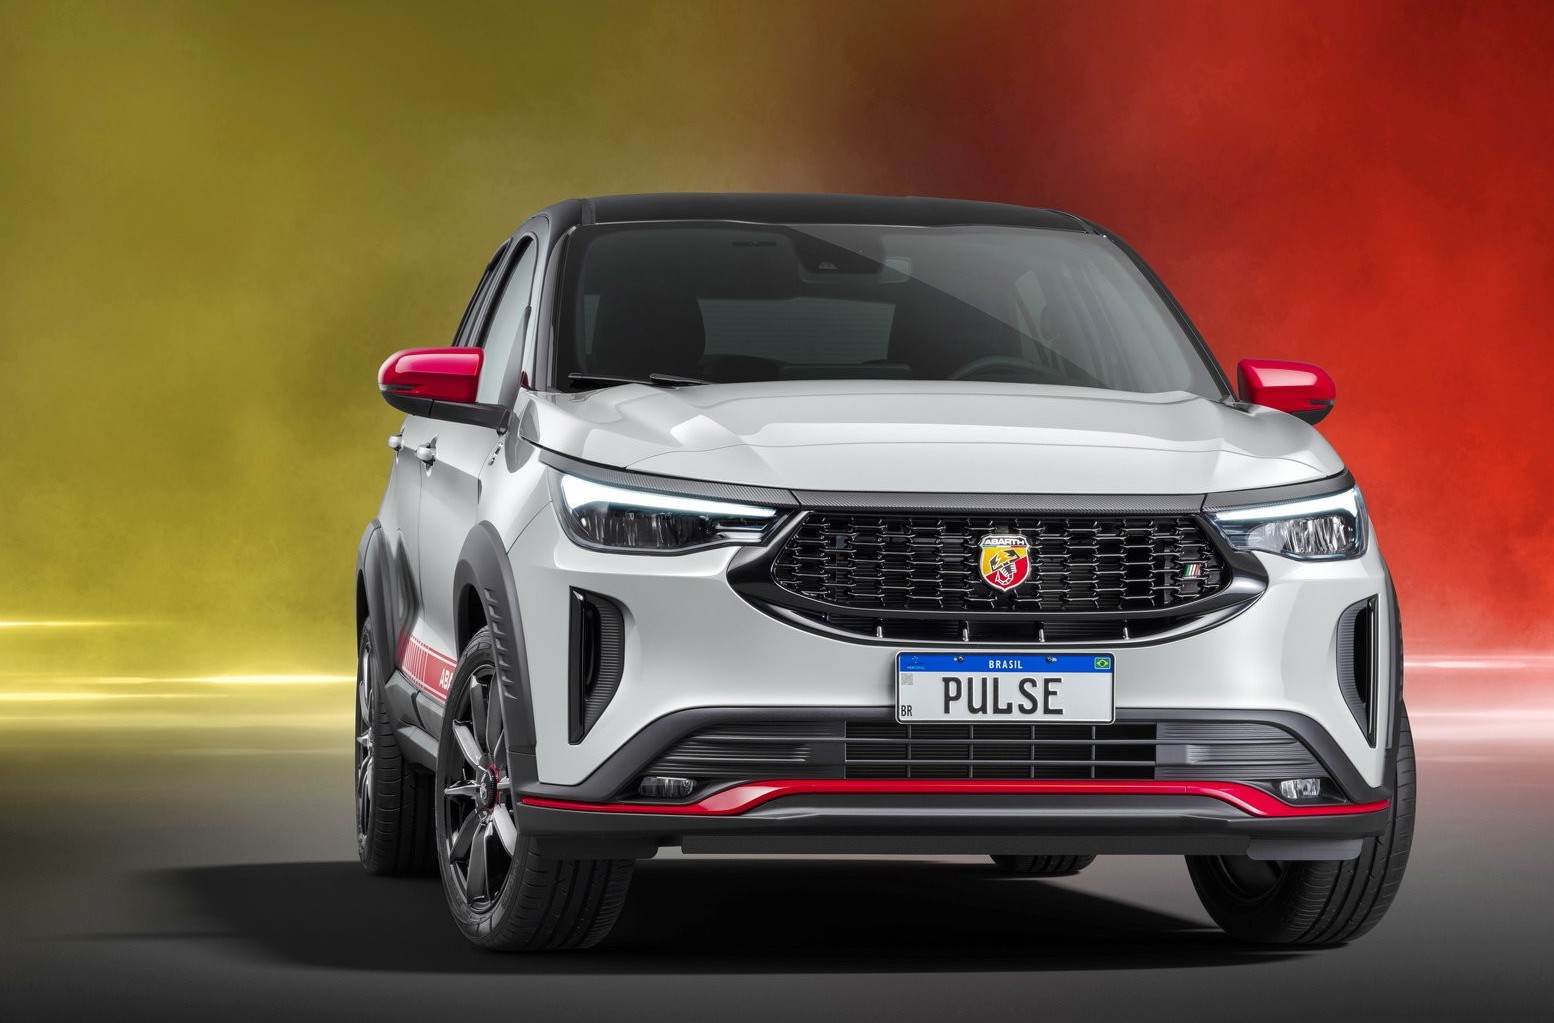 The new Abarth Pulse 2022-2023, a great SUV for the return of the legendary Scorpion